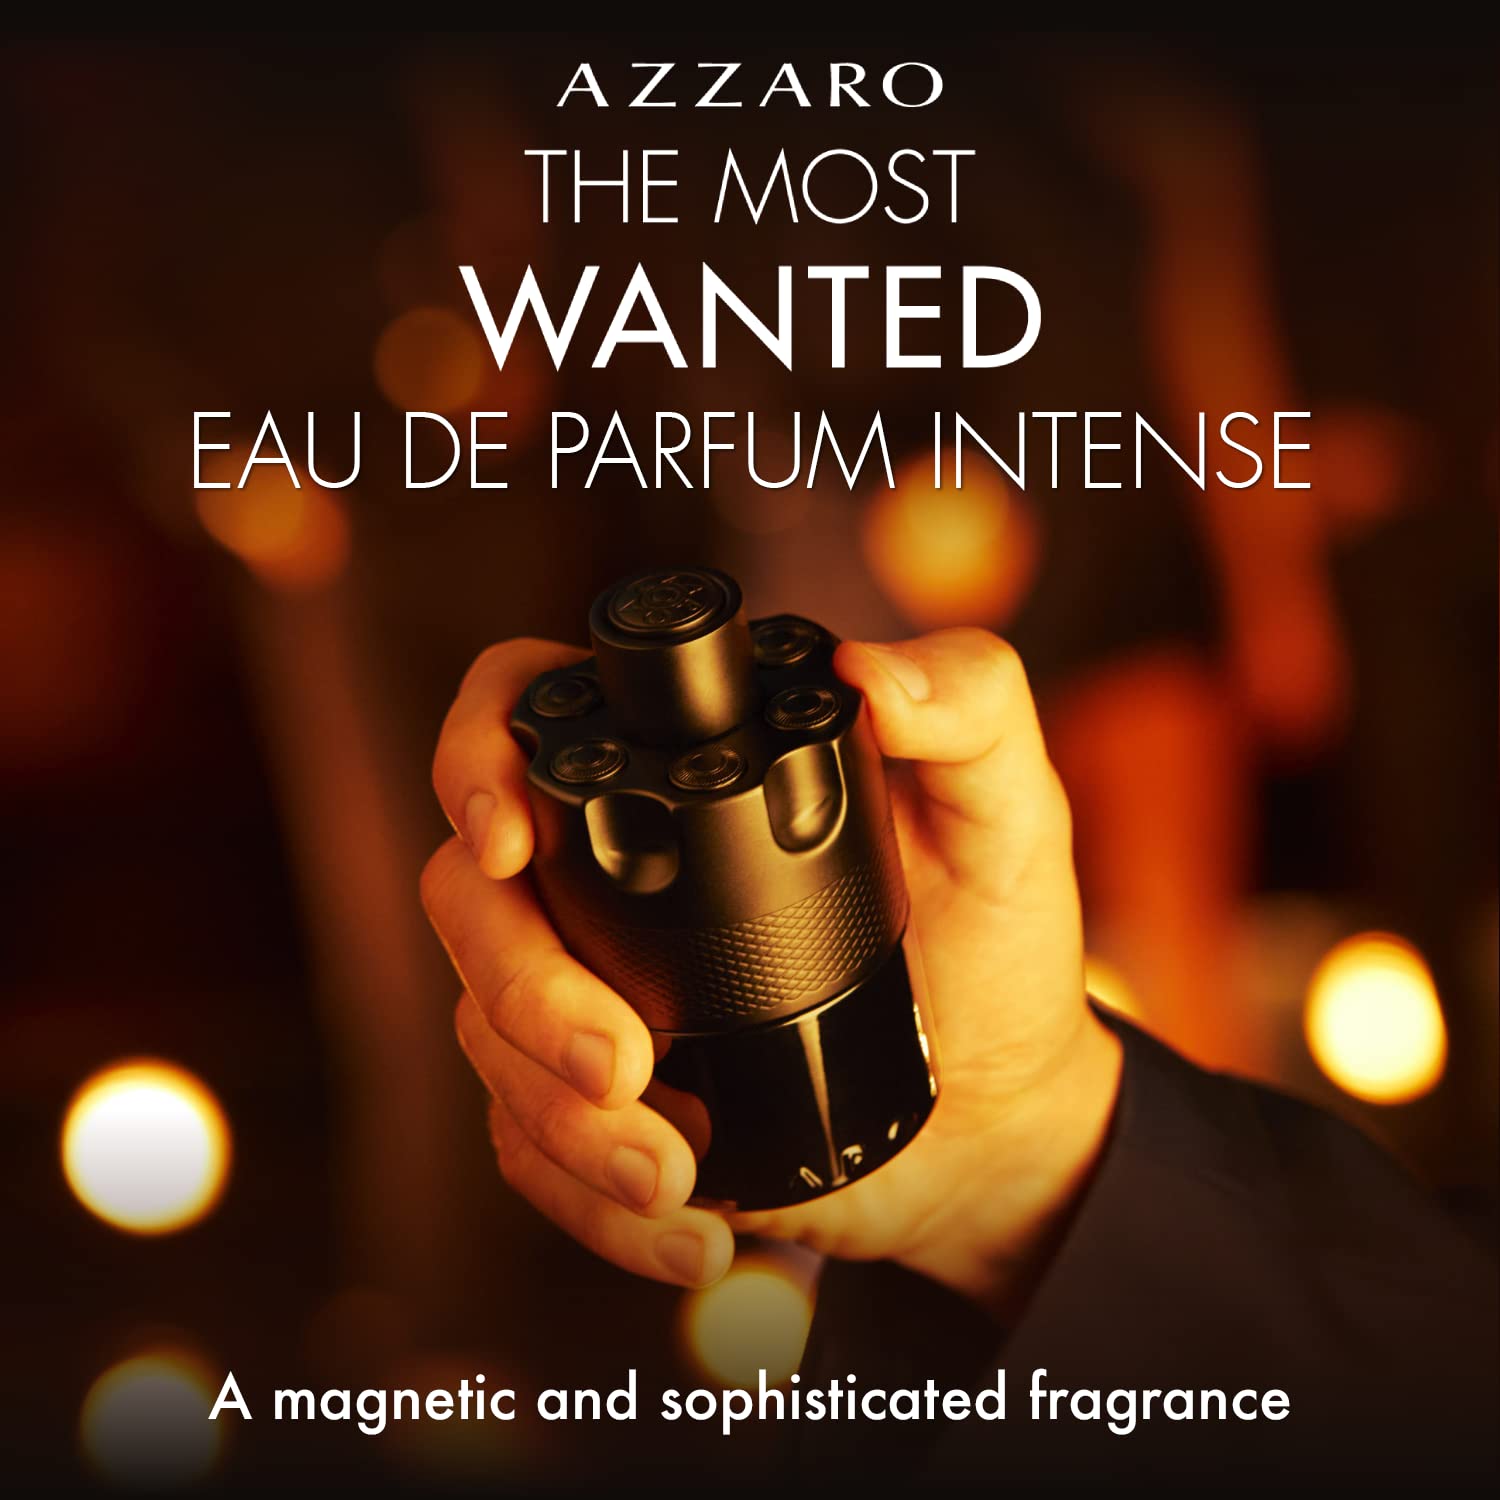 Azzaro The Most Wanted Eau de Parfum Intense - Seductive Mens Cologne - Fougère, Ambery & Spicy Fragrance for Date - Lasting Wear - Luxury Perfumes for Men